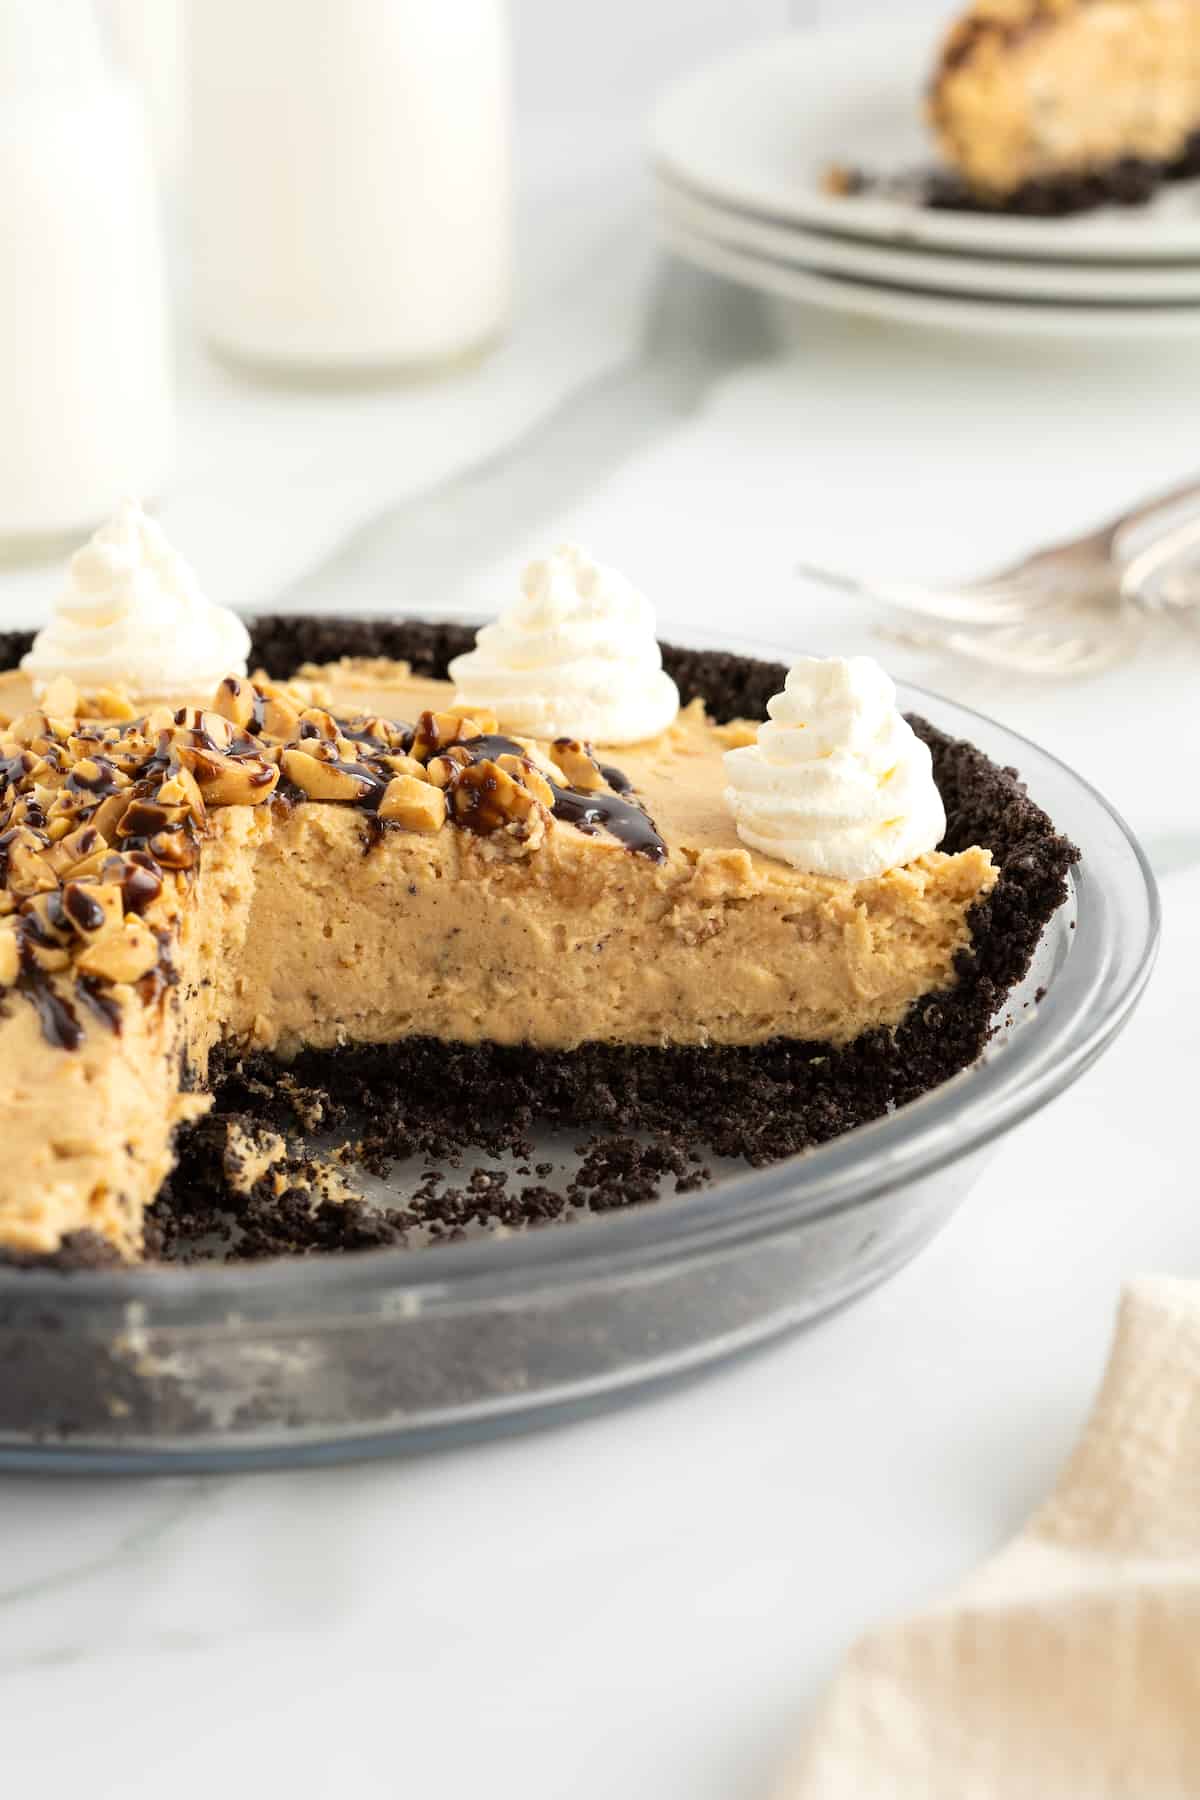 No Bake Chocolate Peanut Butter Pie by The BakerMama